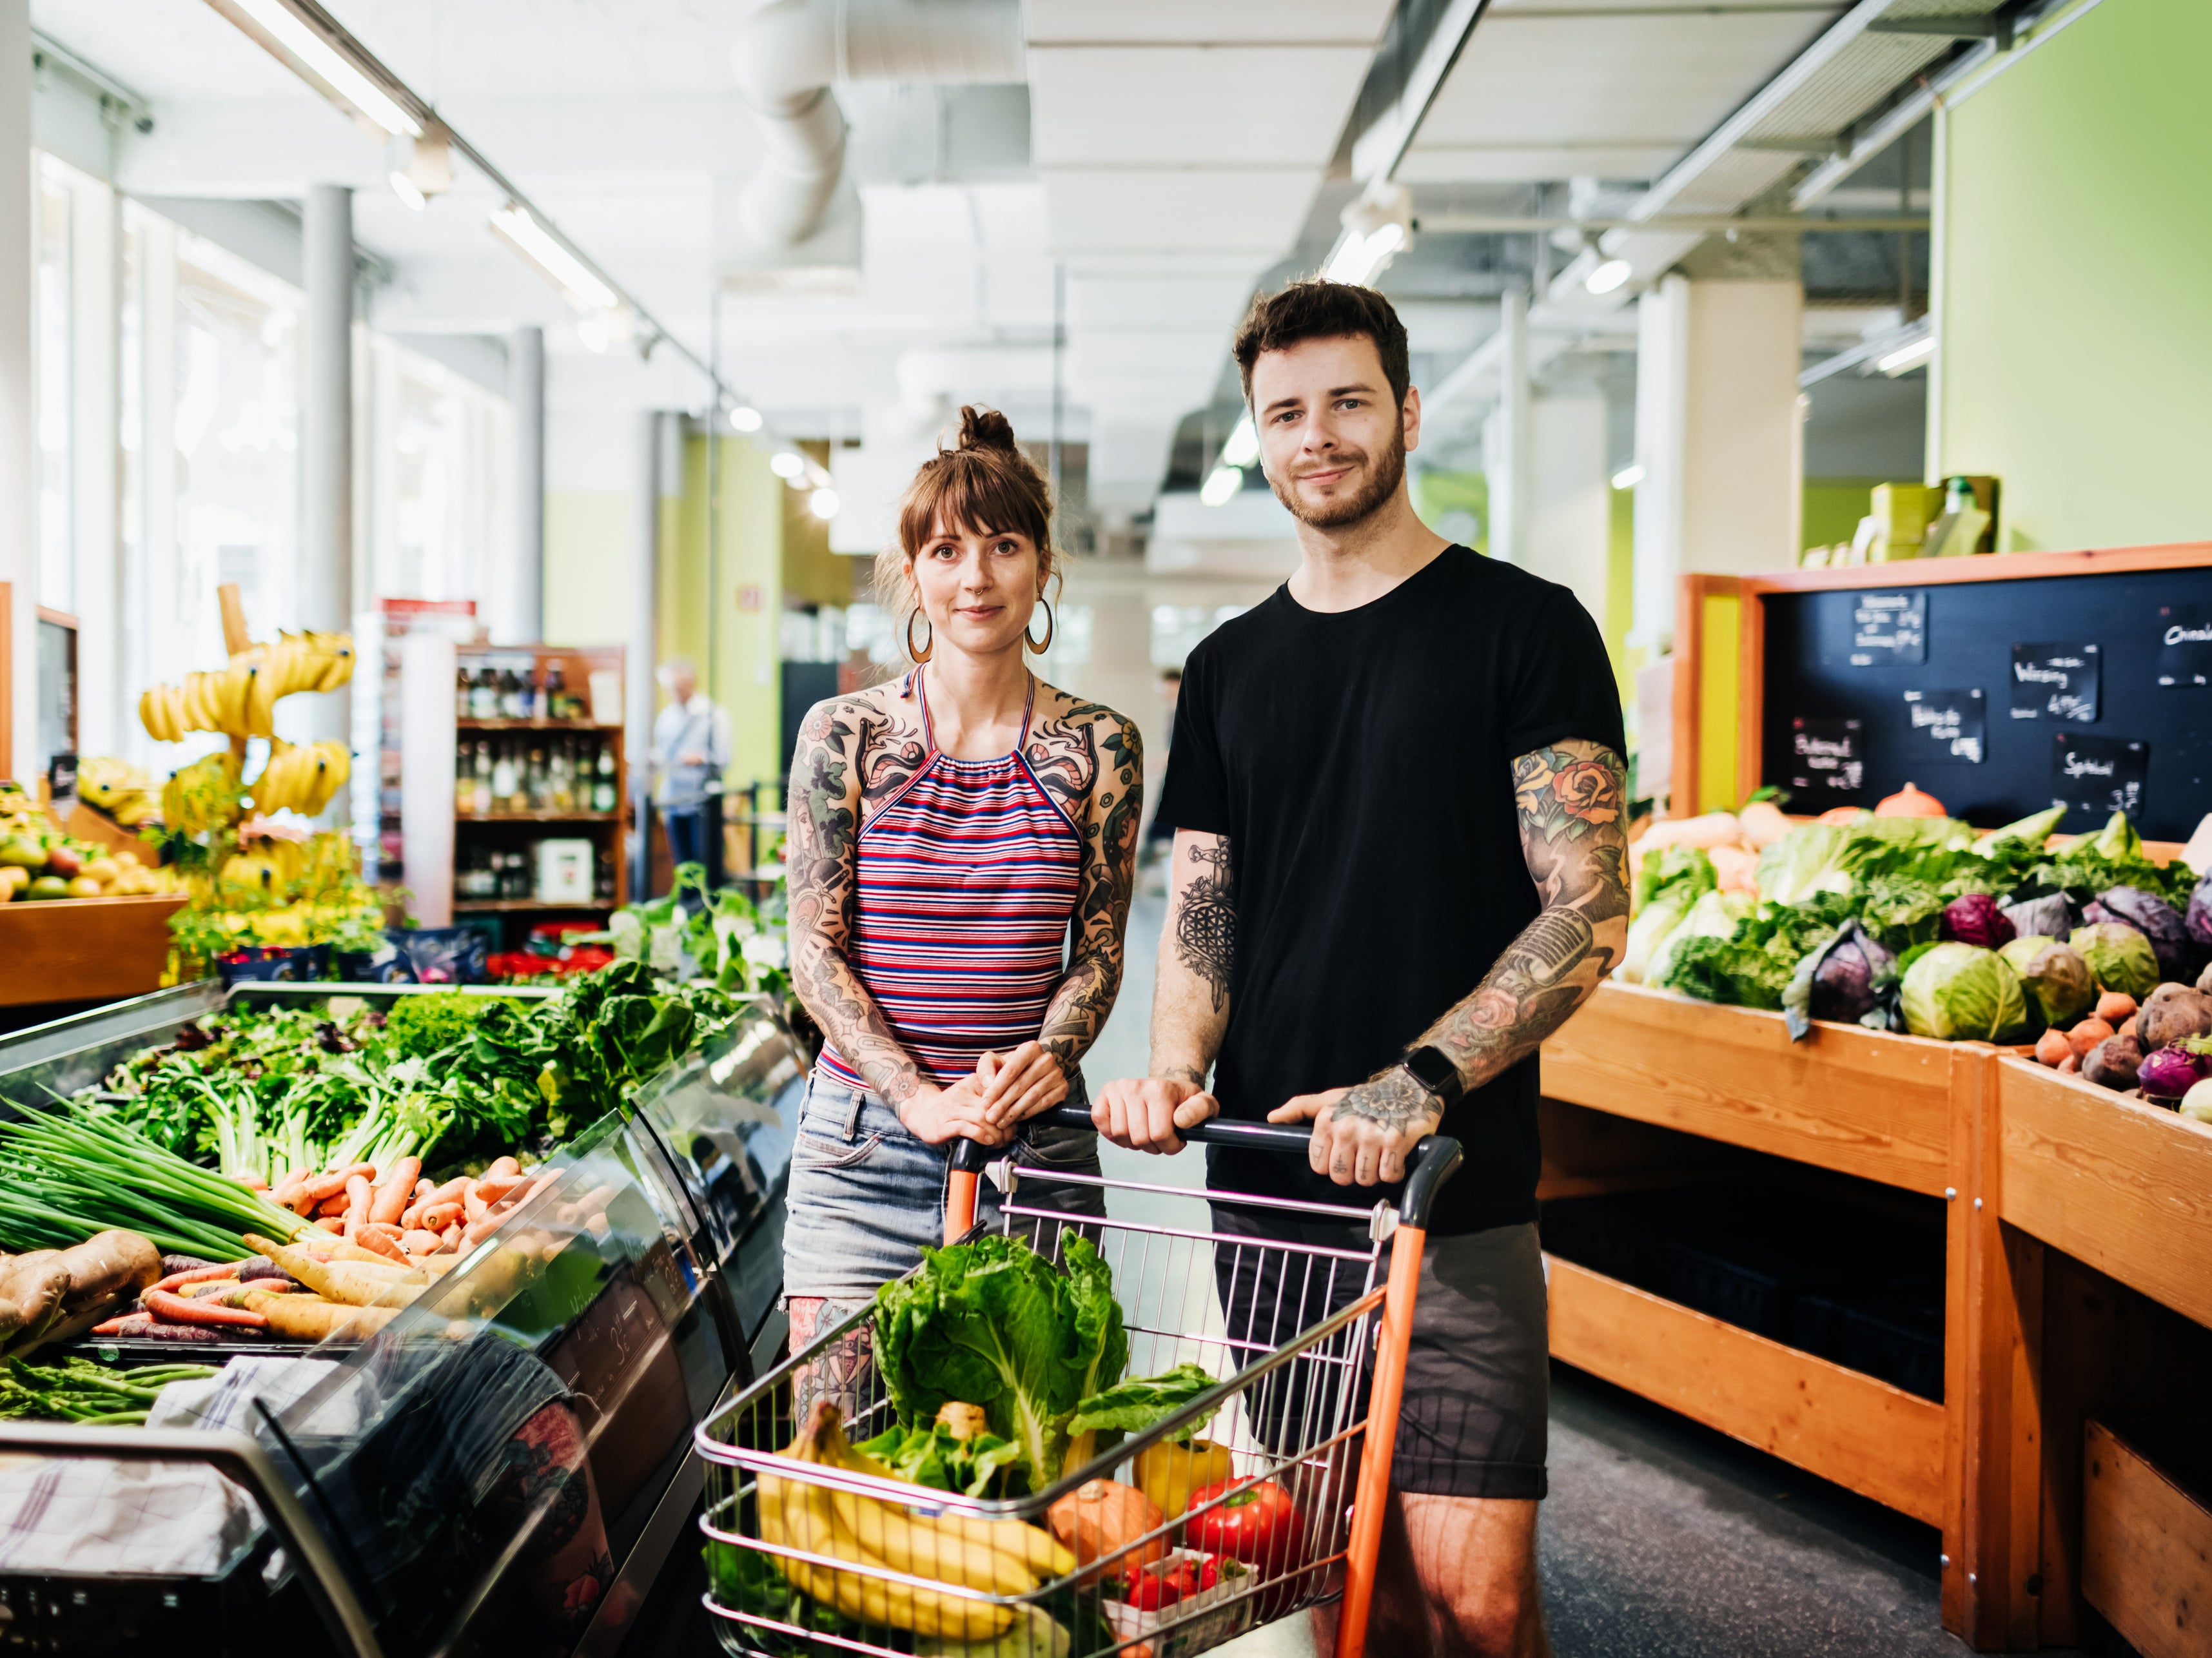 Support from a partner can help to make the switch to meat-free lifestyles